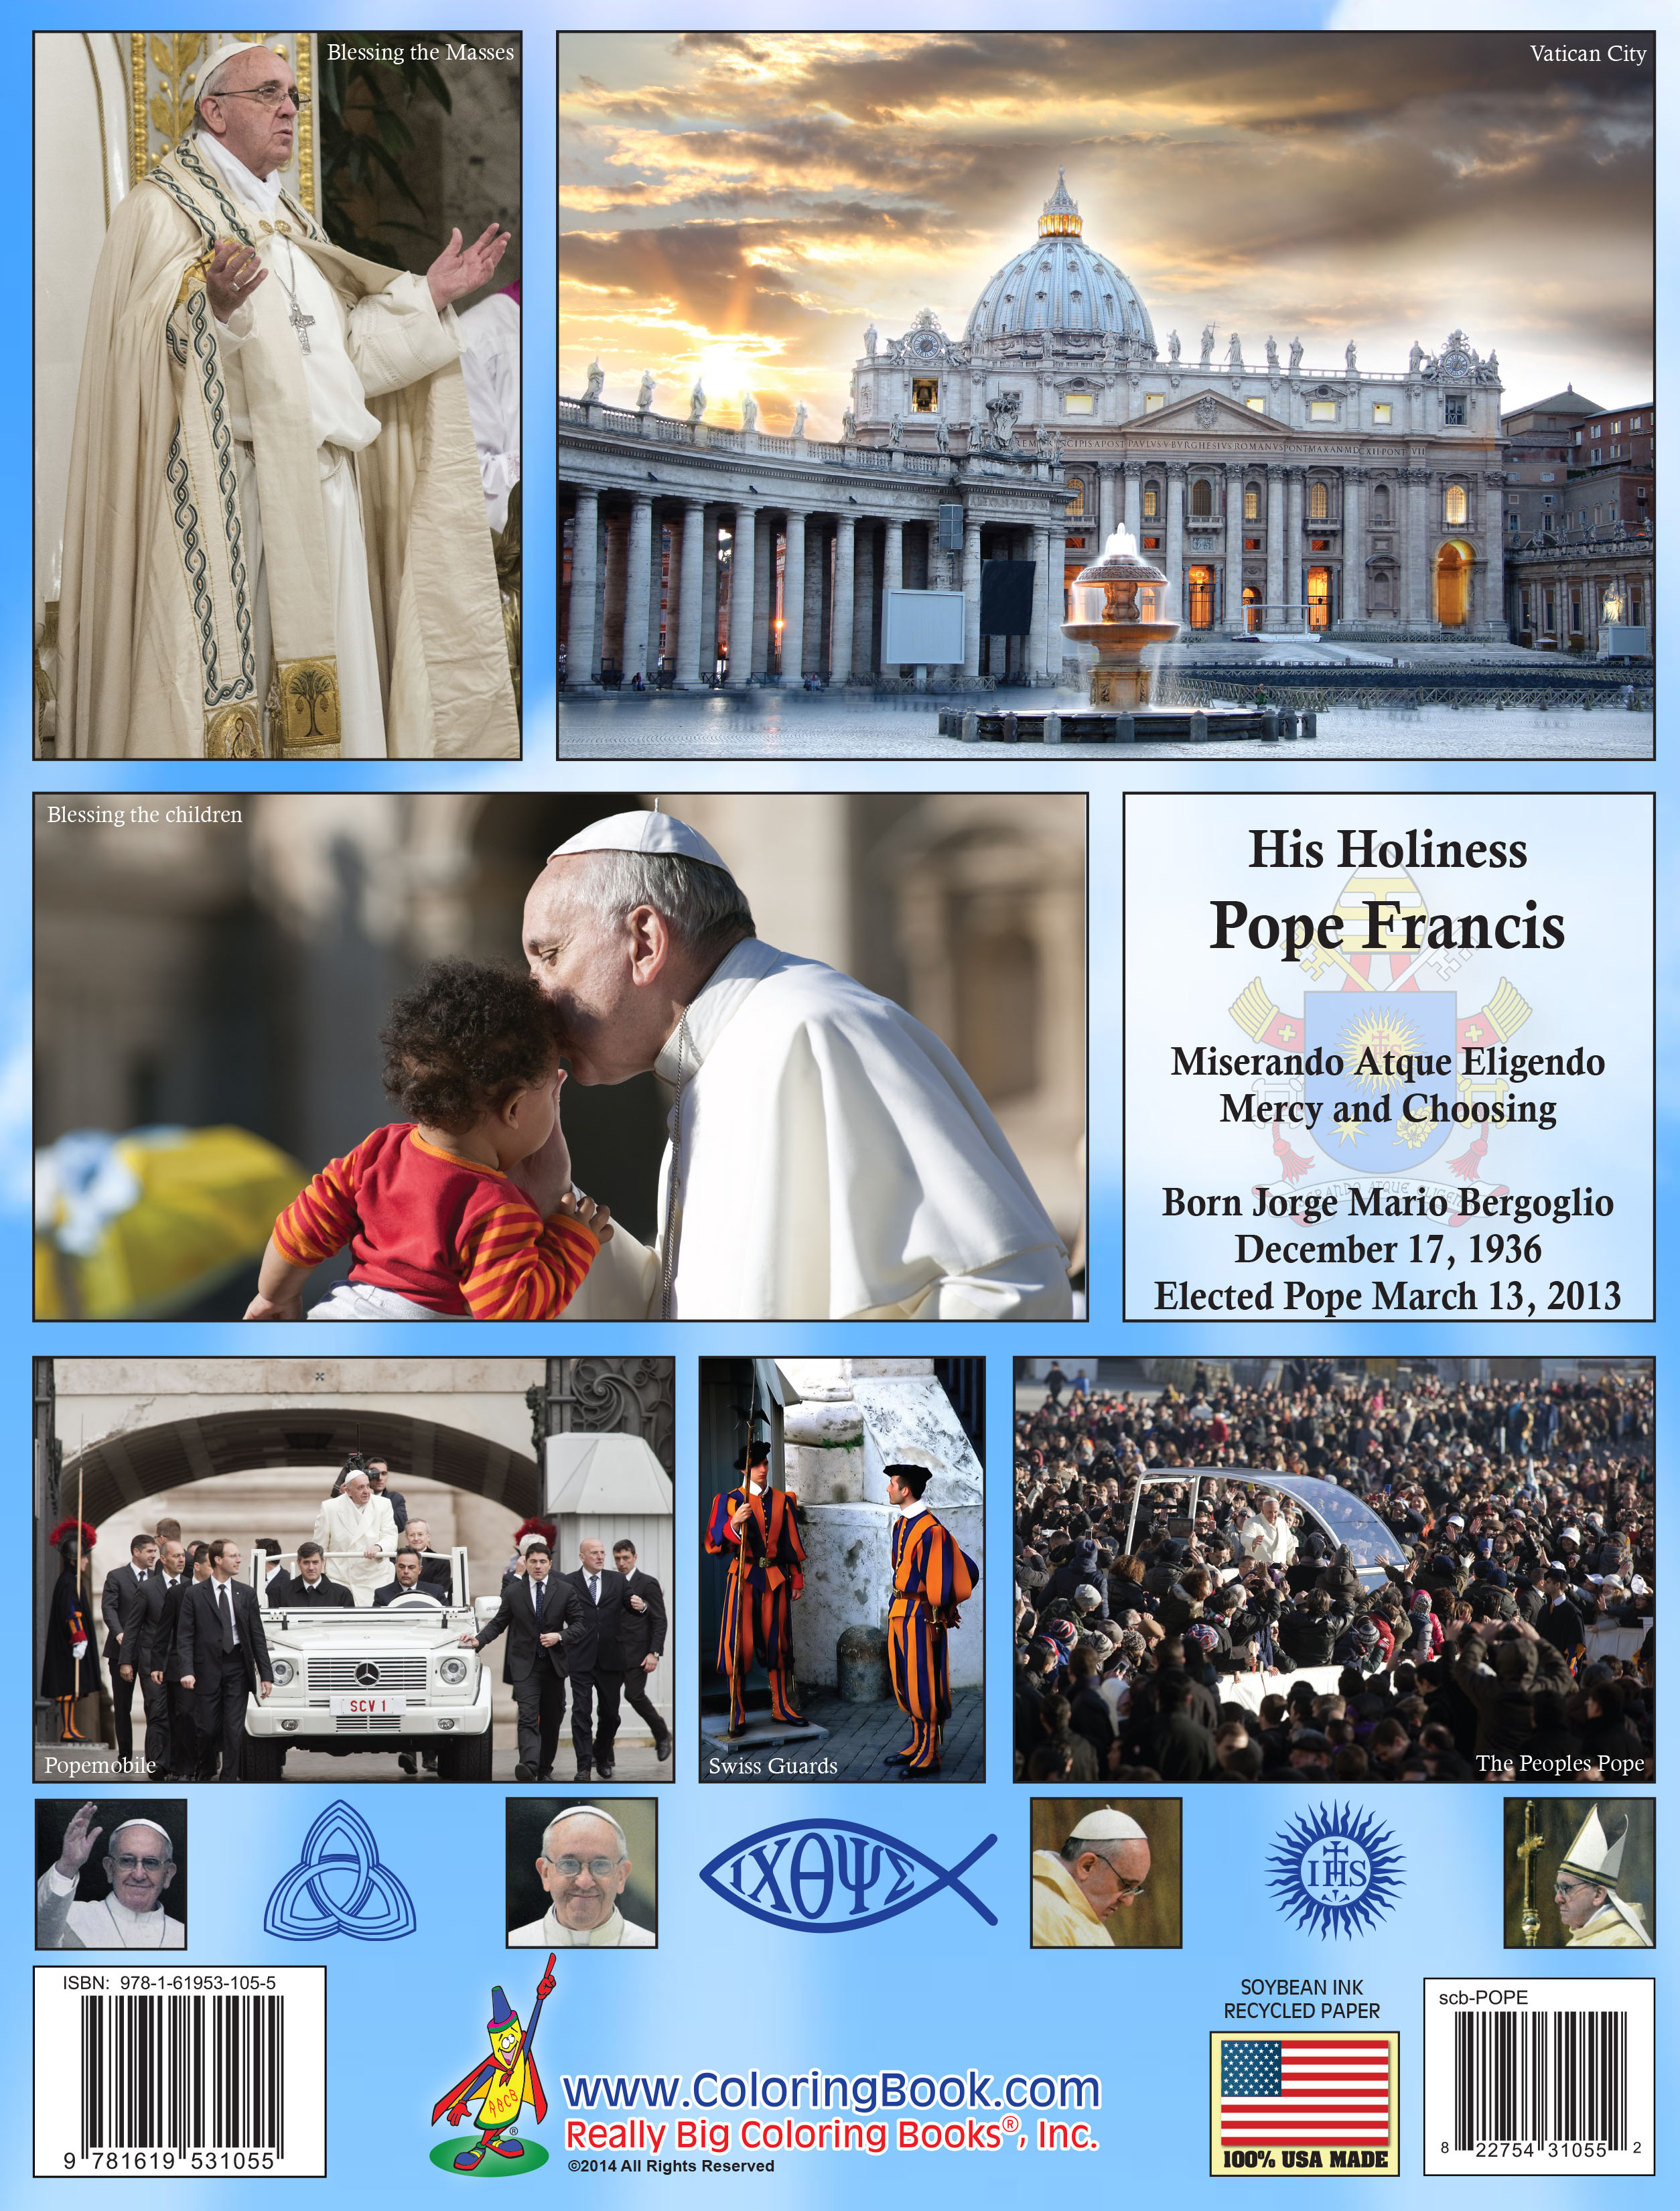 Pope Francis travels and pictures on back cover.